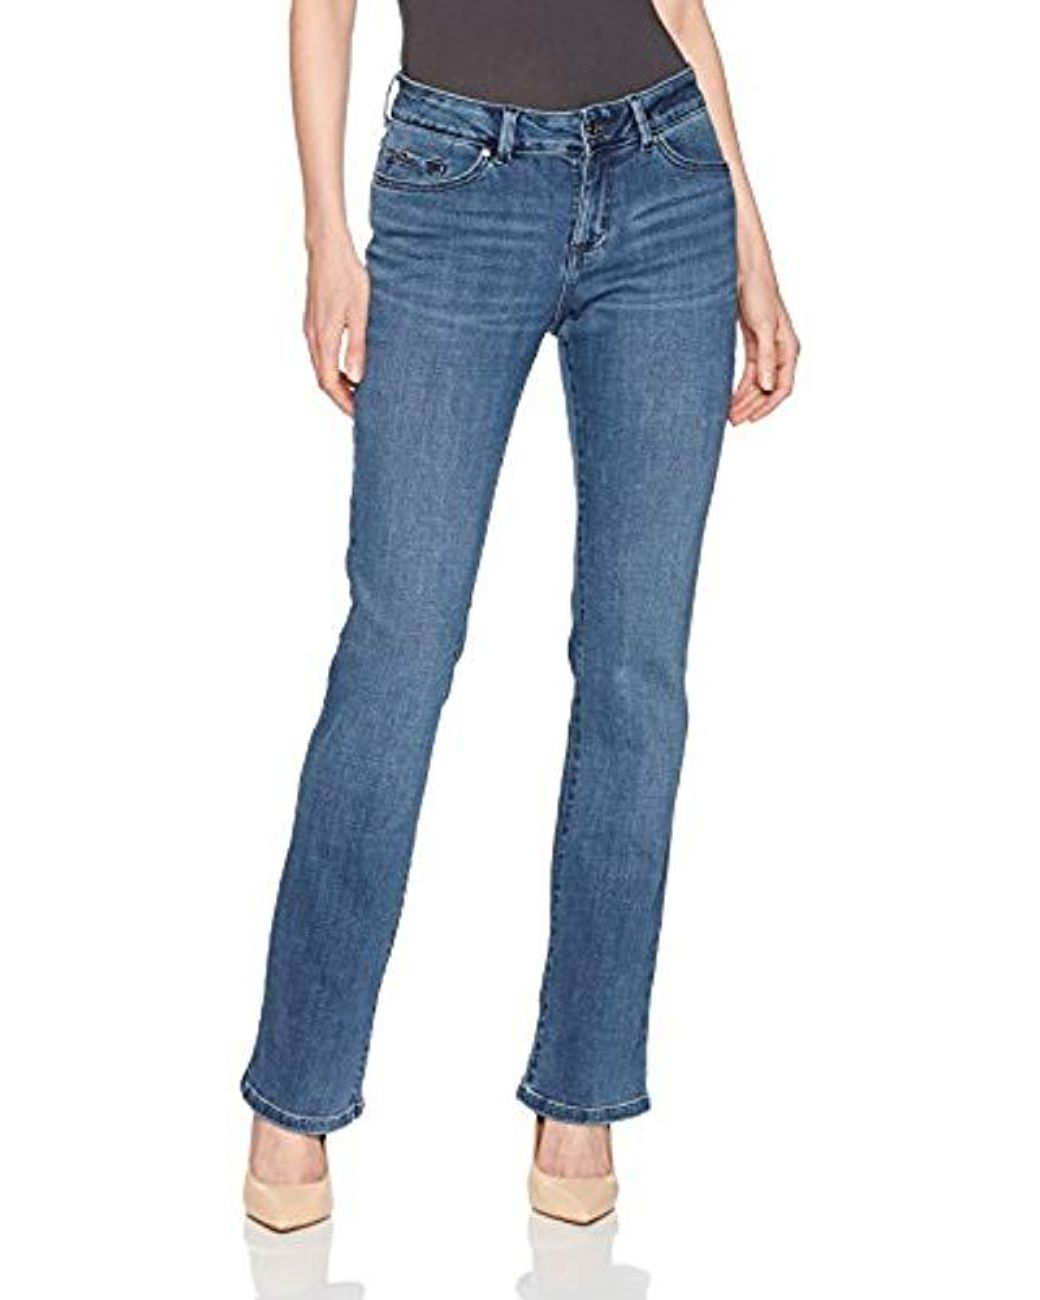 Lee Jeans Modern Series Curvy Fit Bootcut Jean With Hidden Pocket in ...